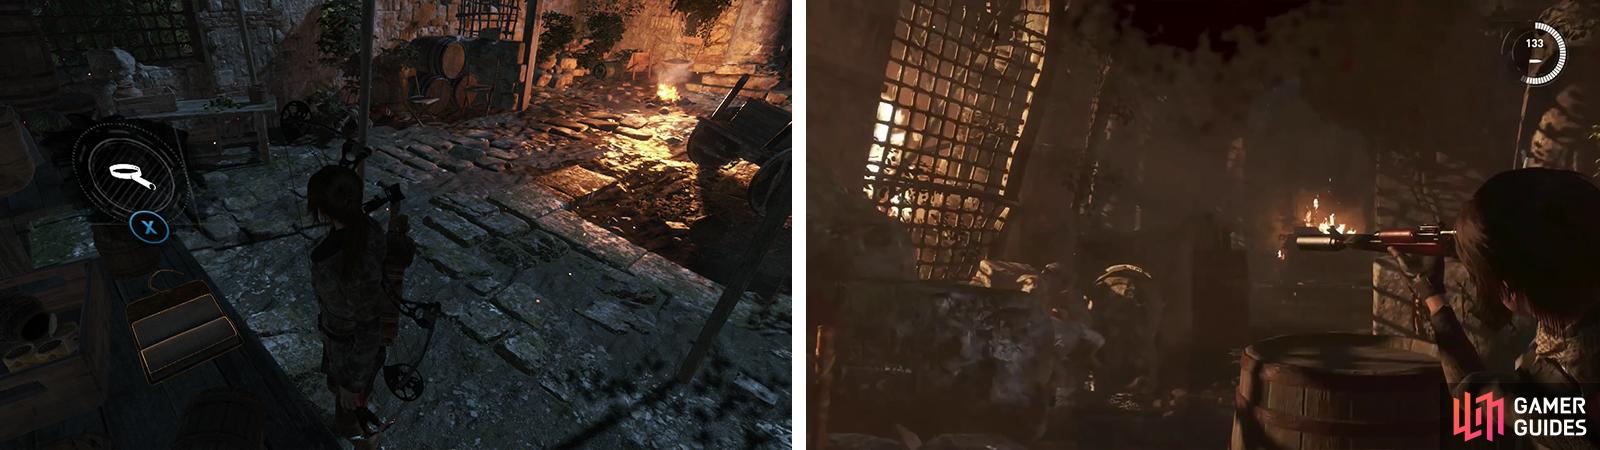 Grab Document 07 (left) and shoot the final walkie-talkie before continuing. Fight your way down the narrow corridor (right).